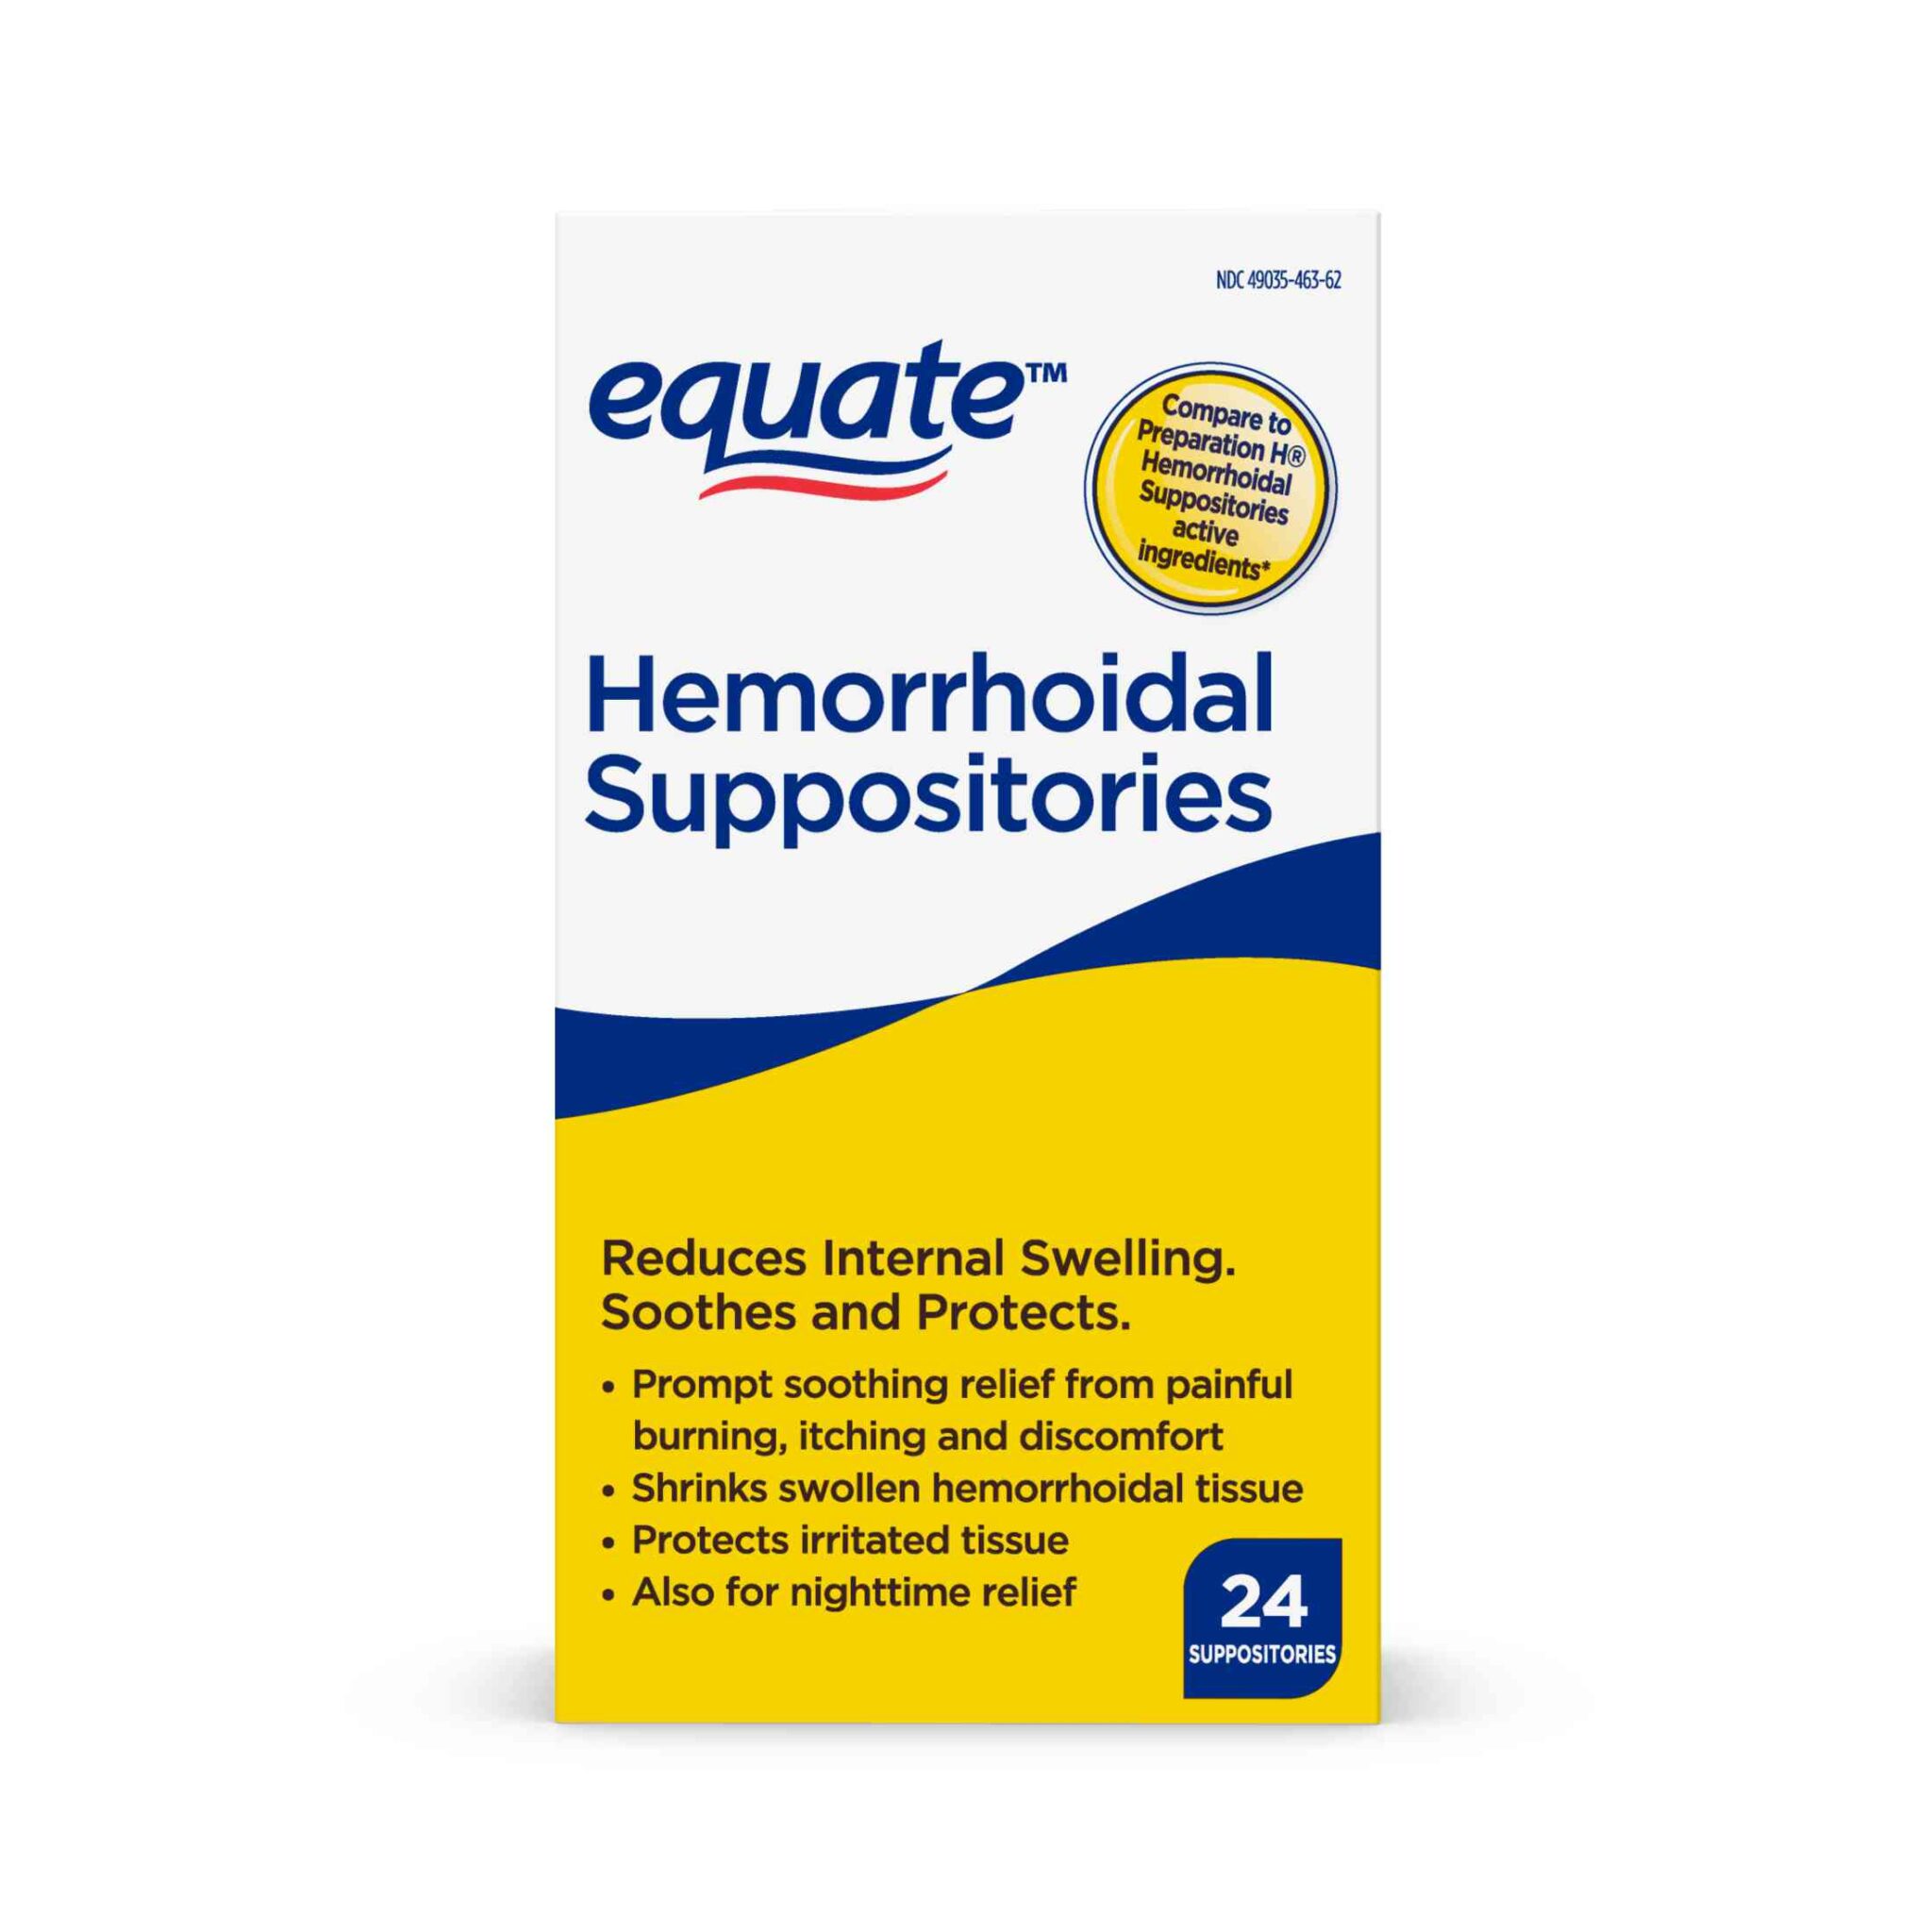 Equate Hemorrhoidal Suppositories 24 Count Crowdedline Delivery 